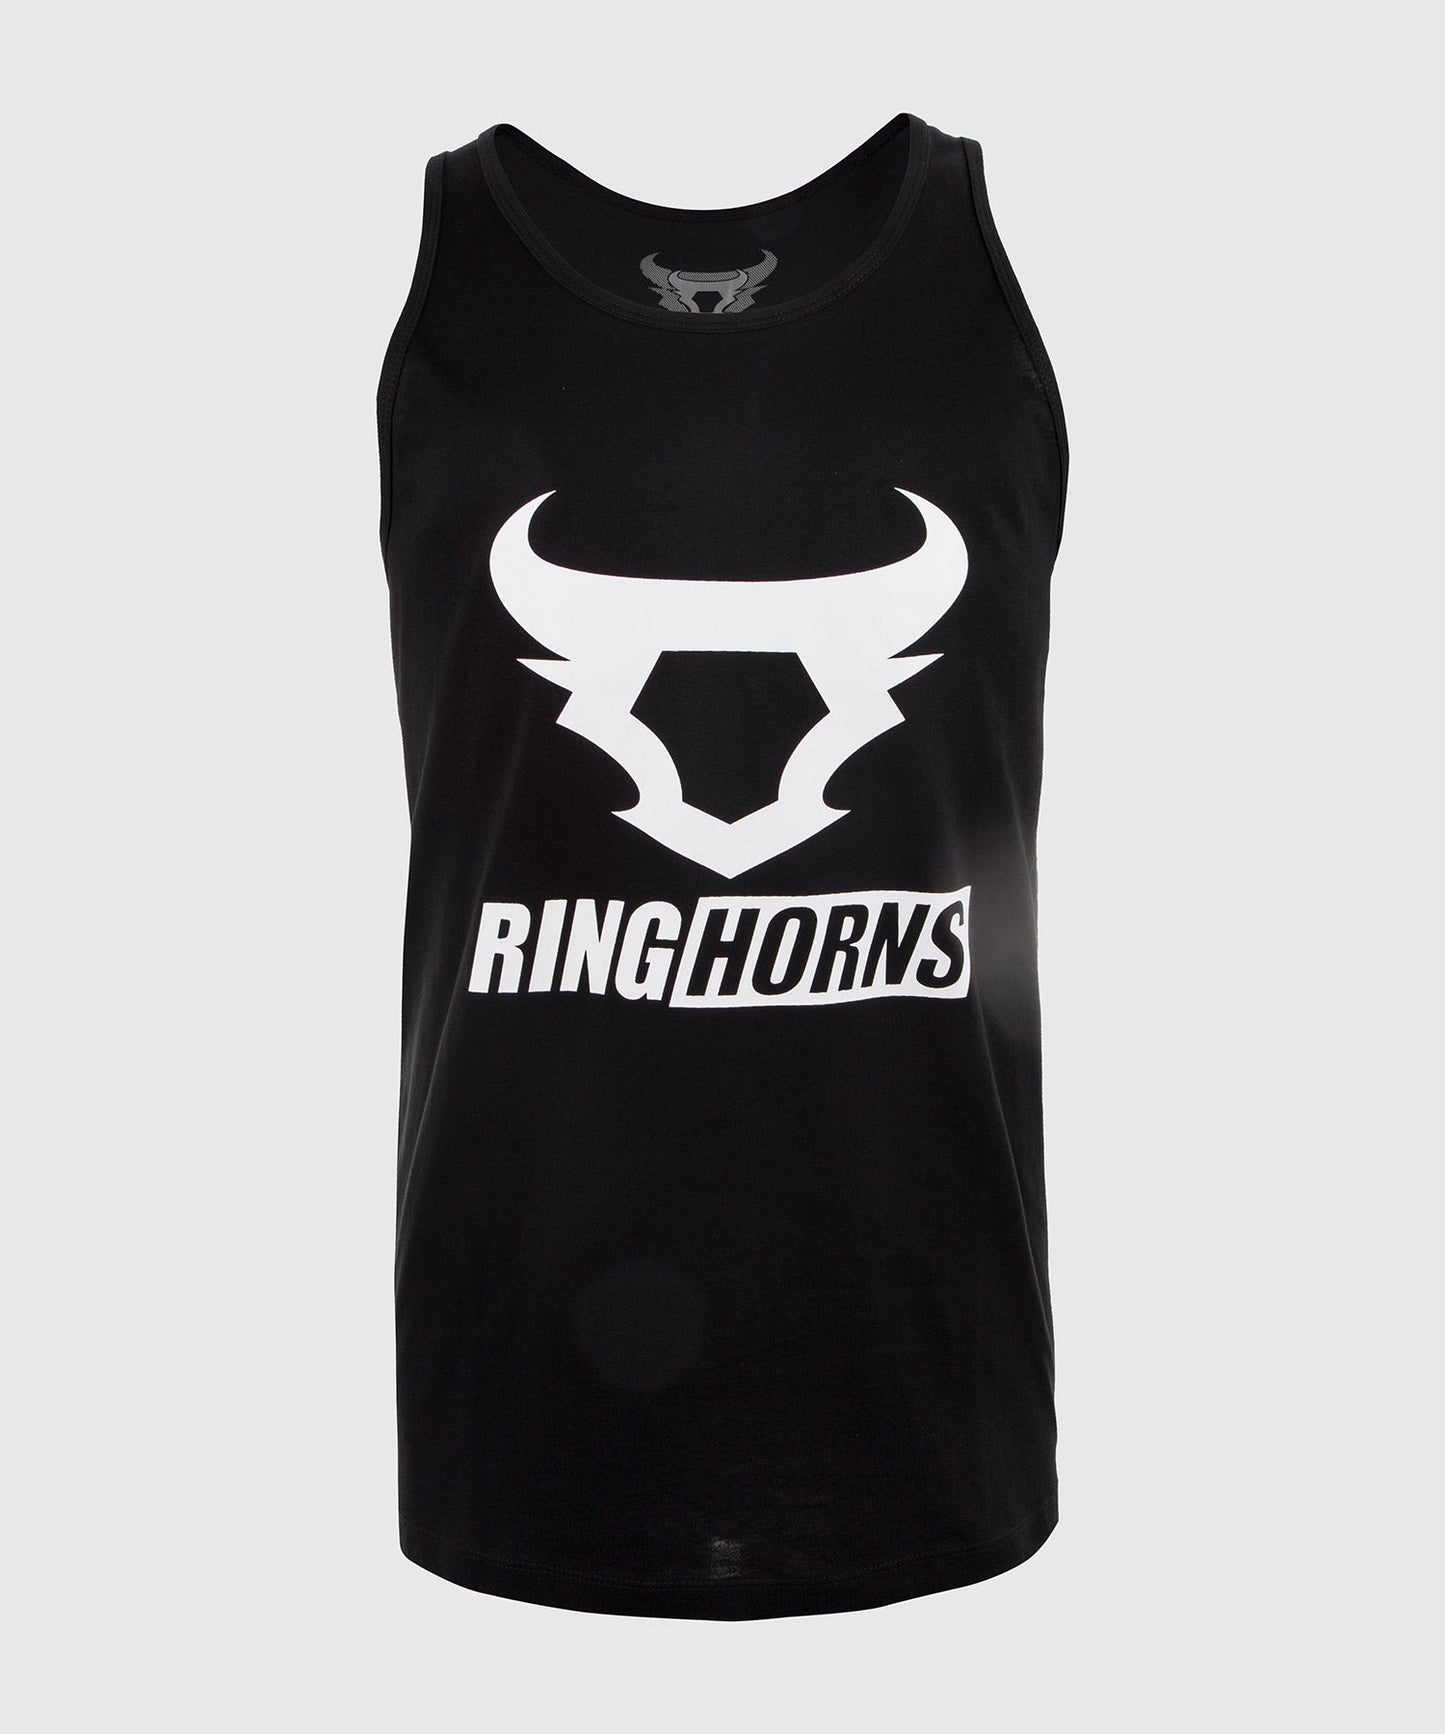 Ringhorns Tank Top Charger - Black